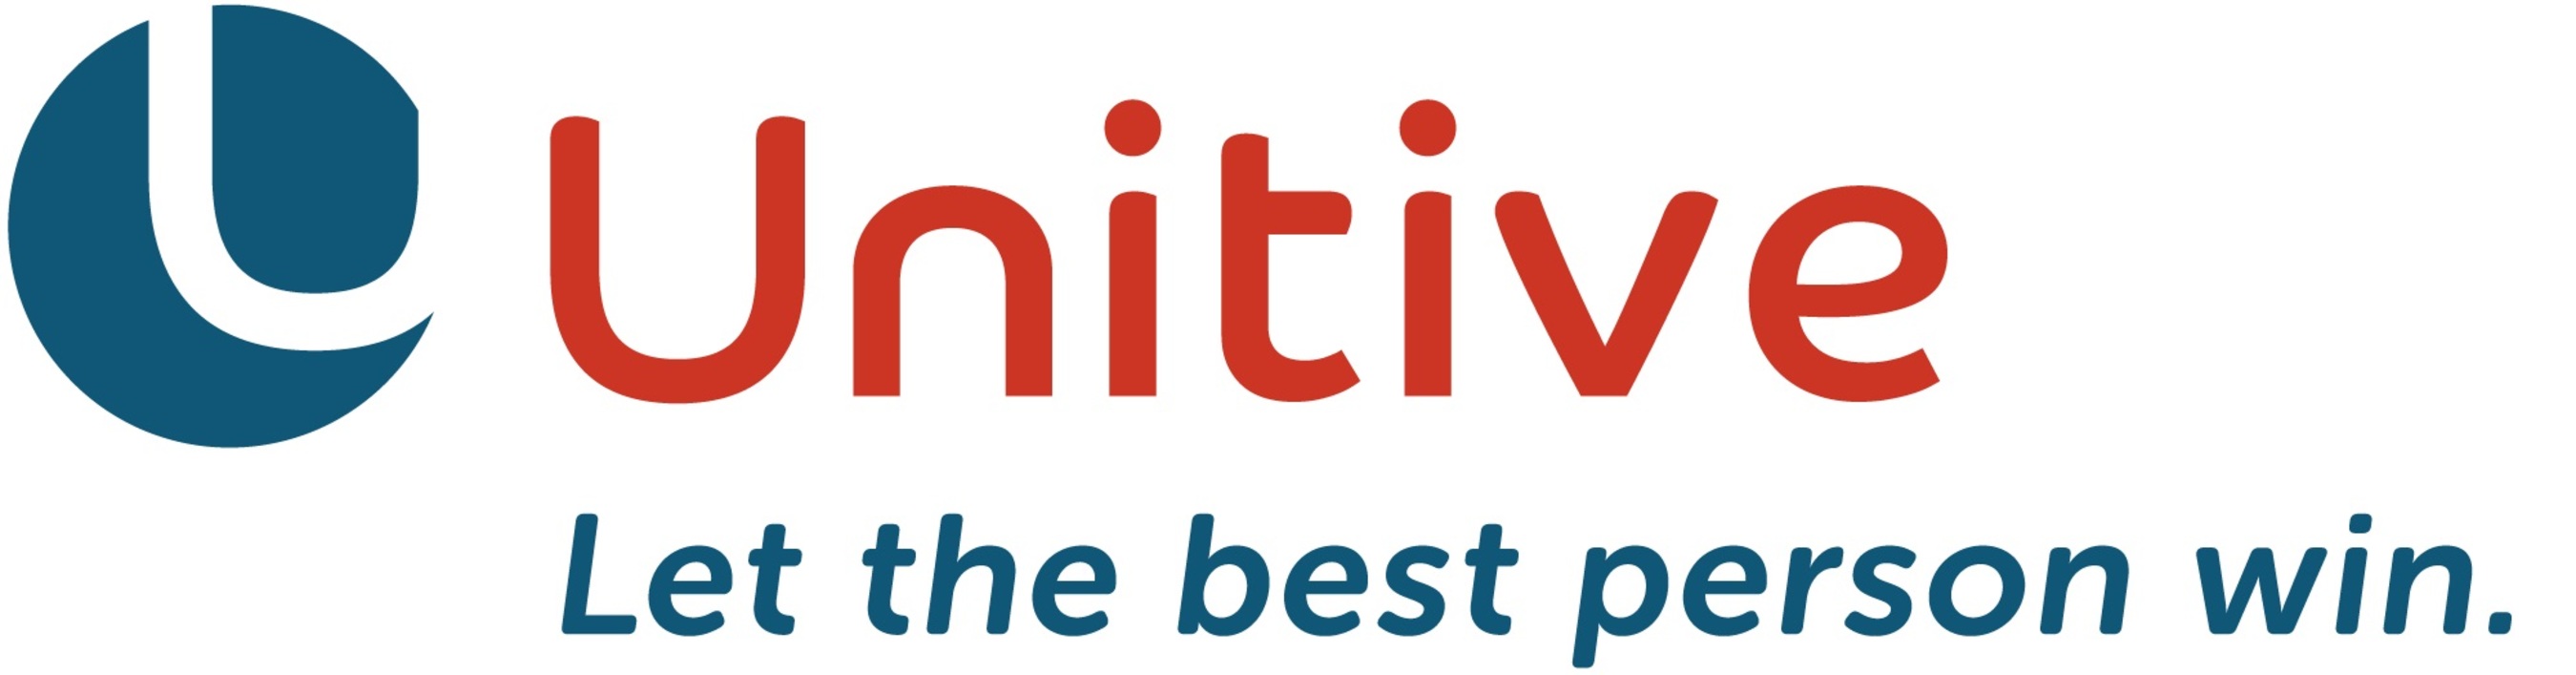 Unitive is a technology solution for full talent activation, helping corporations build diverse, innovative, productive teams. Unitive goes beyond training and reinforces behavioral change in real-time. Unitive transforms theoretical ideas about unconscious bias into pragmatic solutions that build stronger teams